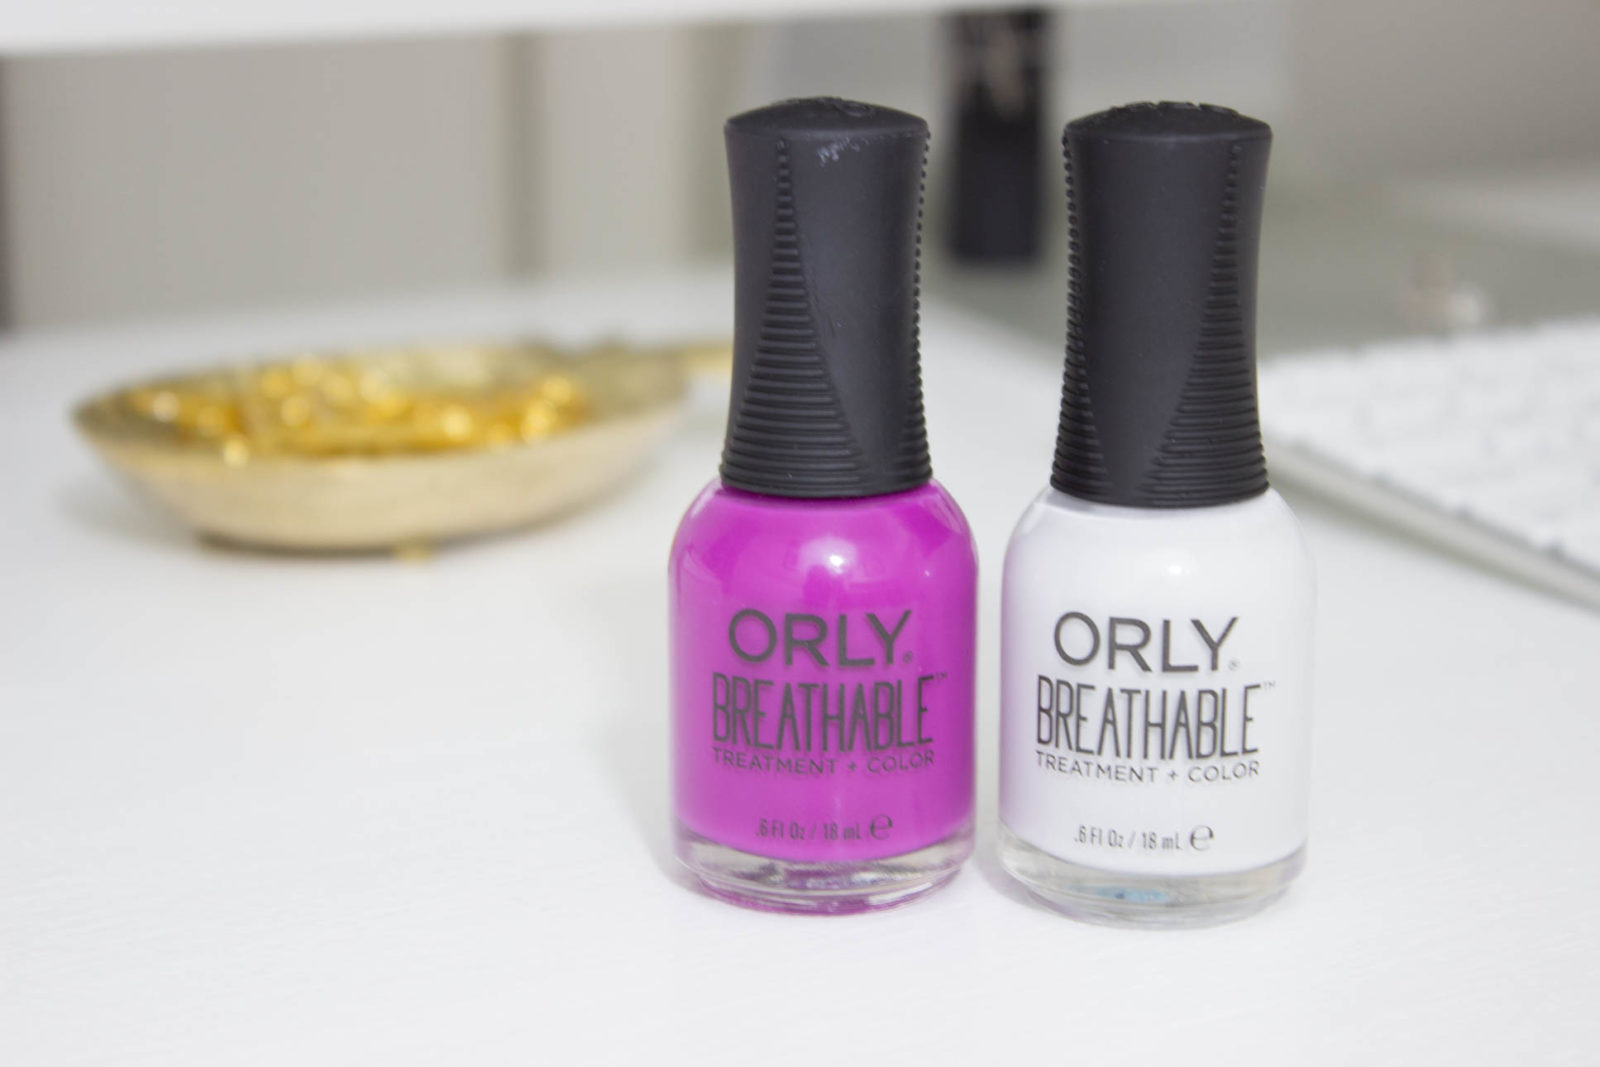 ORLY Breathable Treatment + Color Nail Polish - wide 6